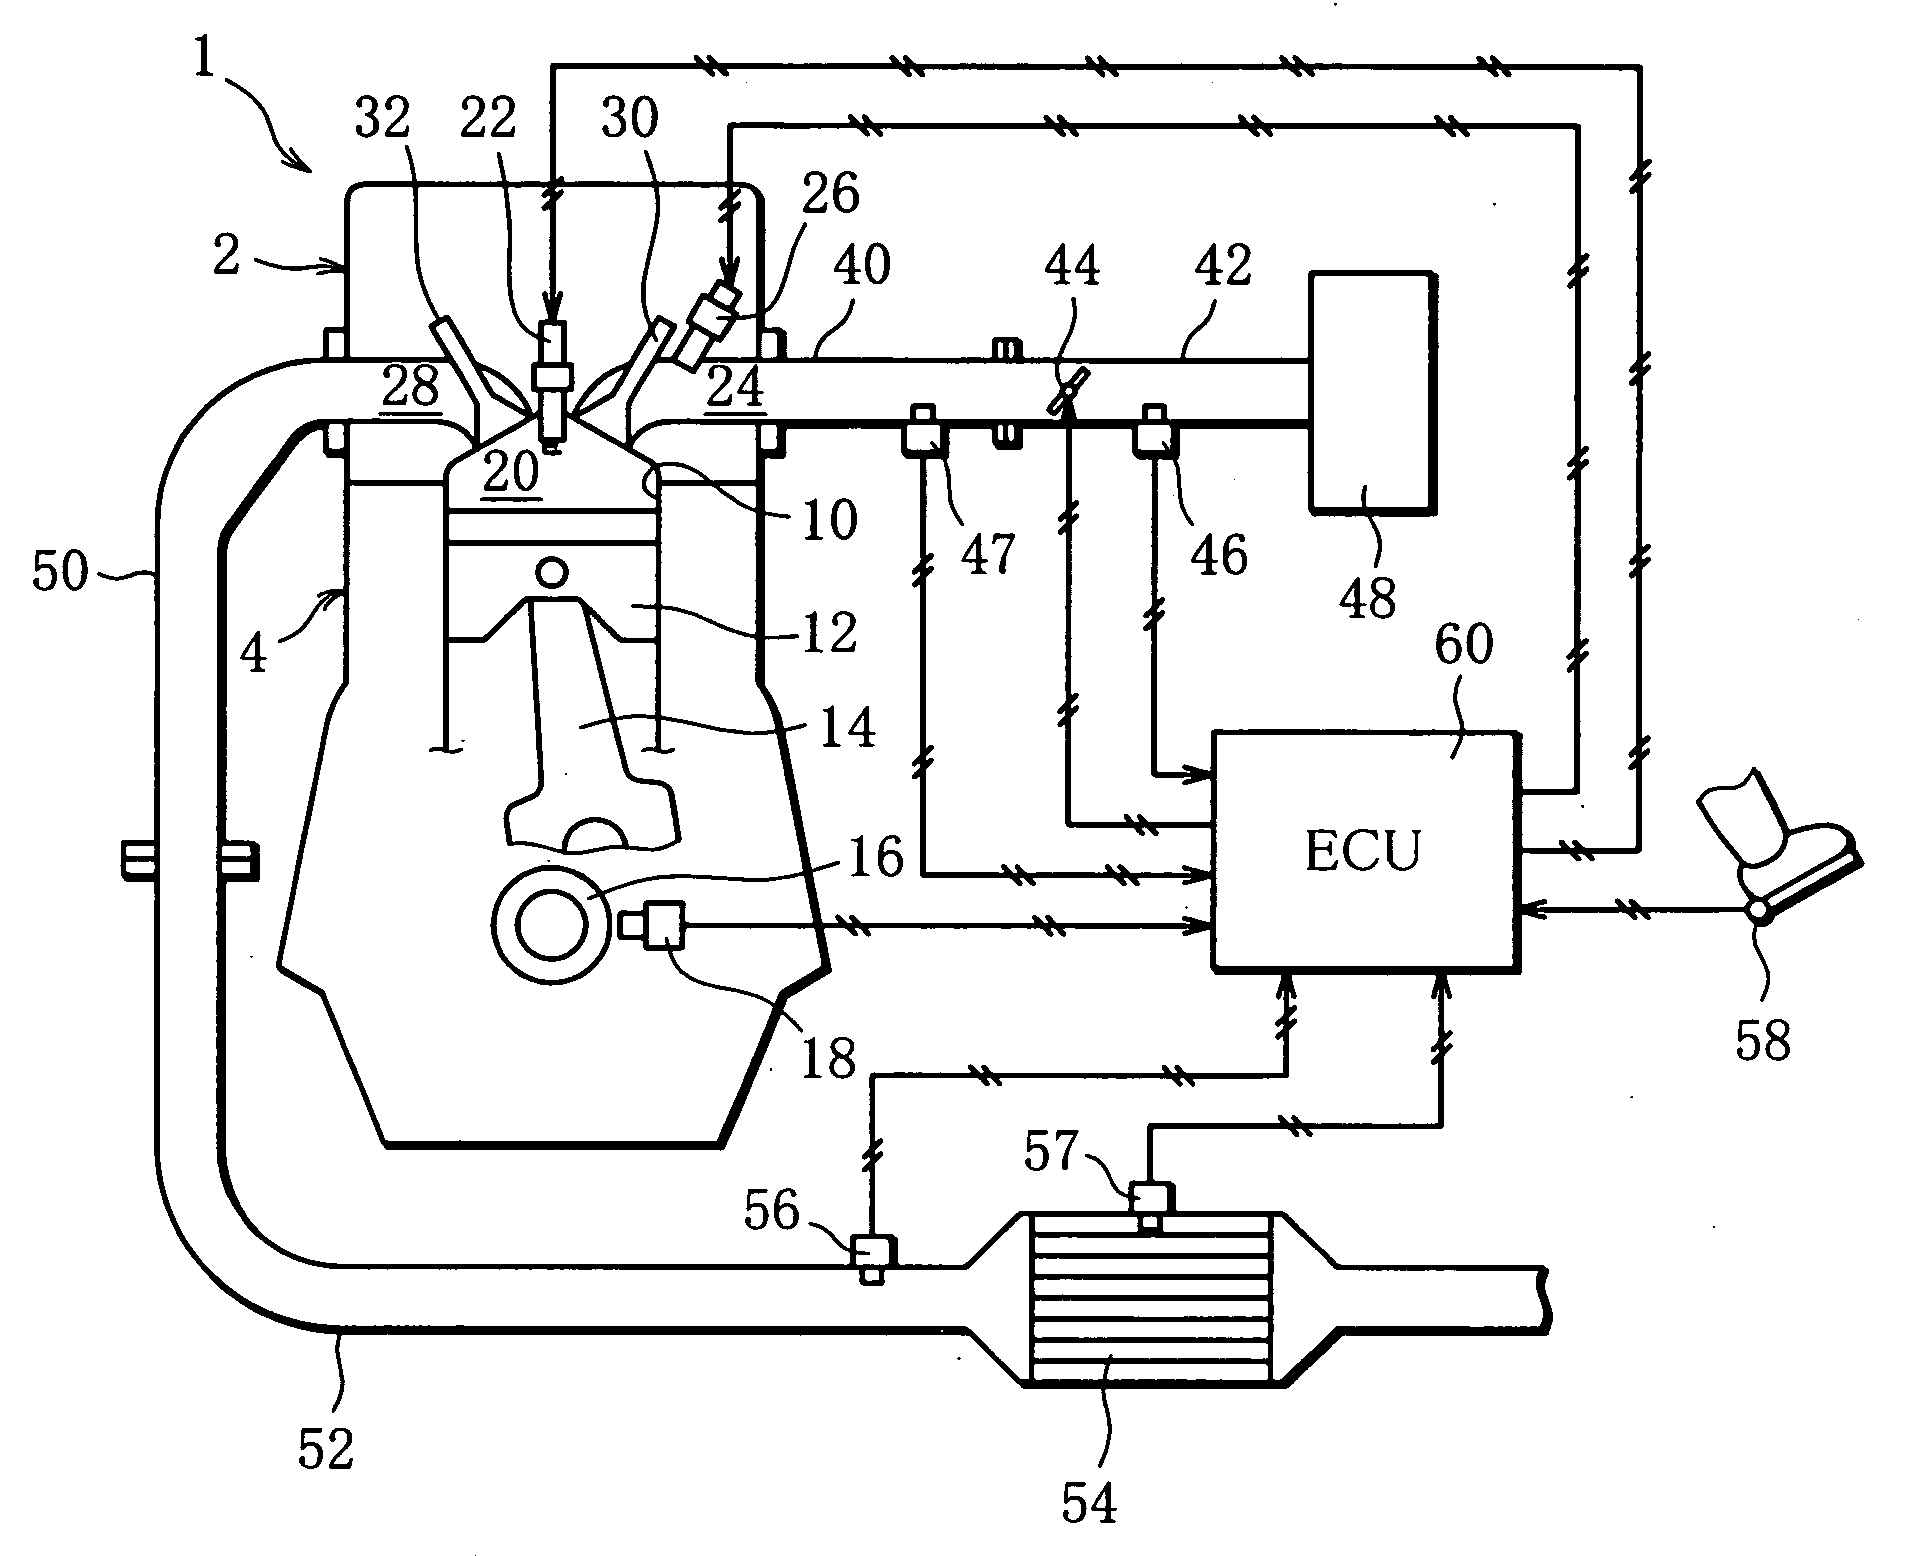 Controller of an internal combustion engine